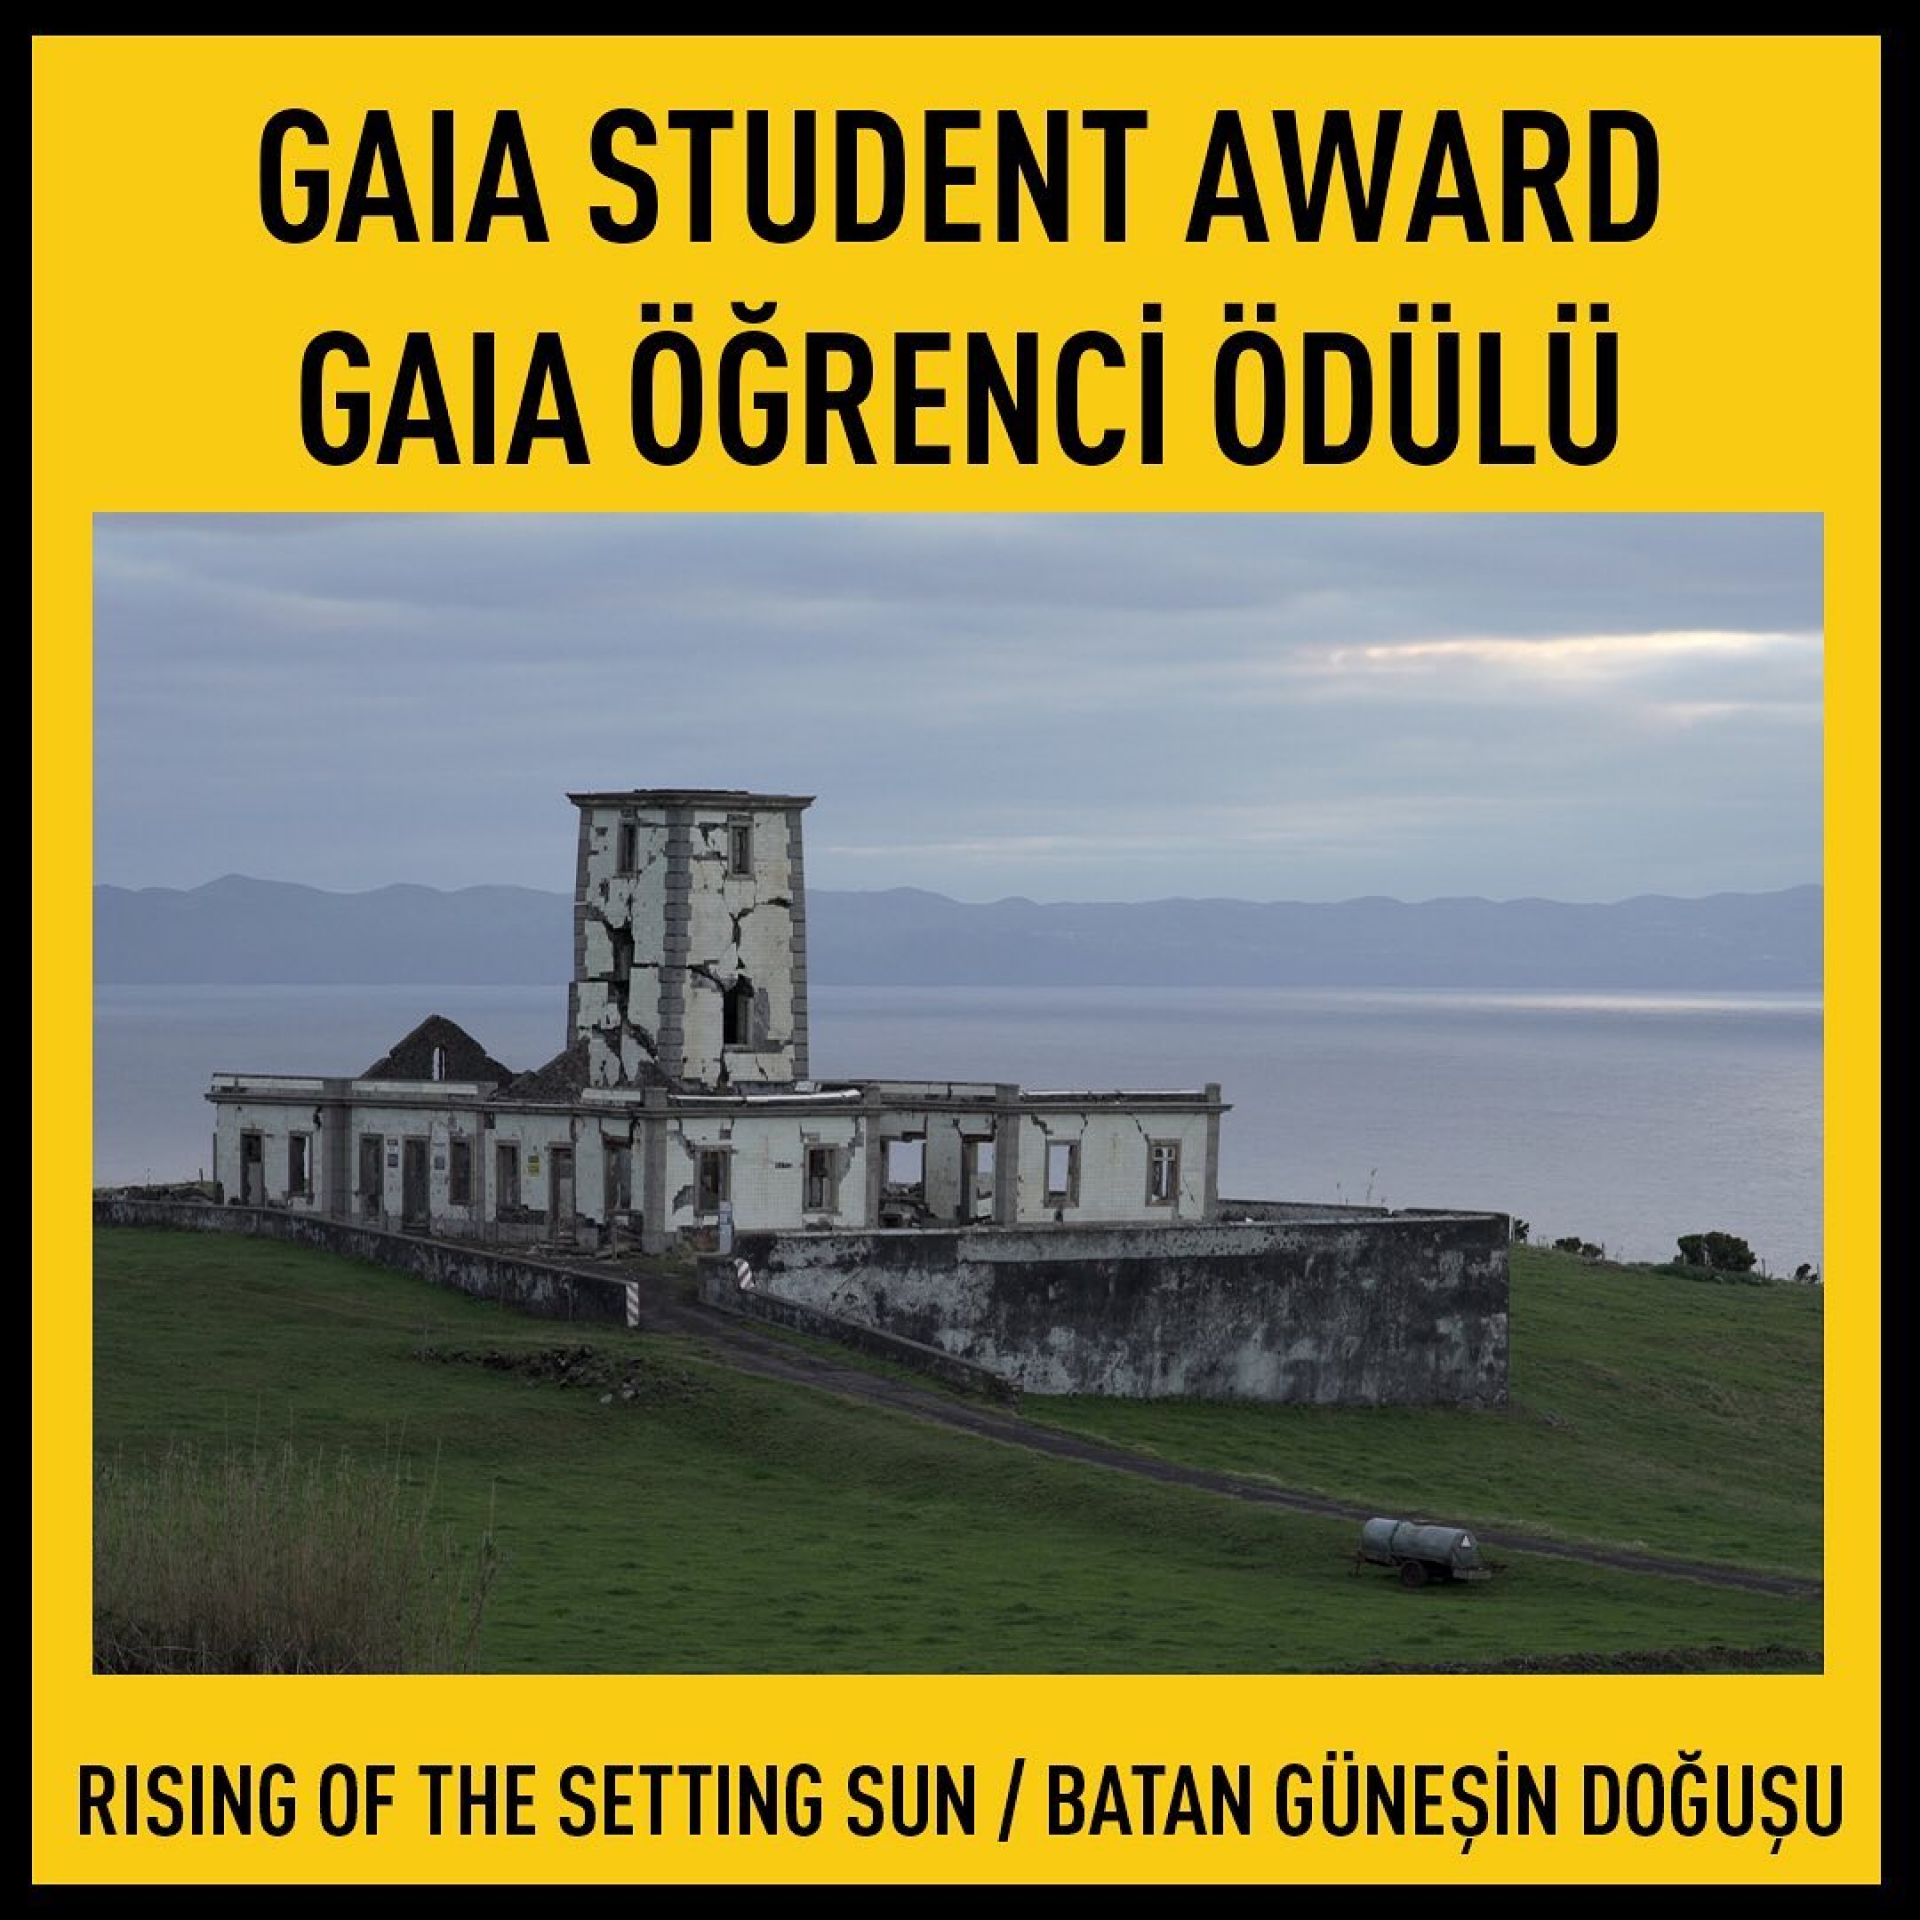 Gaia Student Award for &quot;Rising of the Setting Sun&quot;